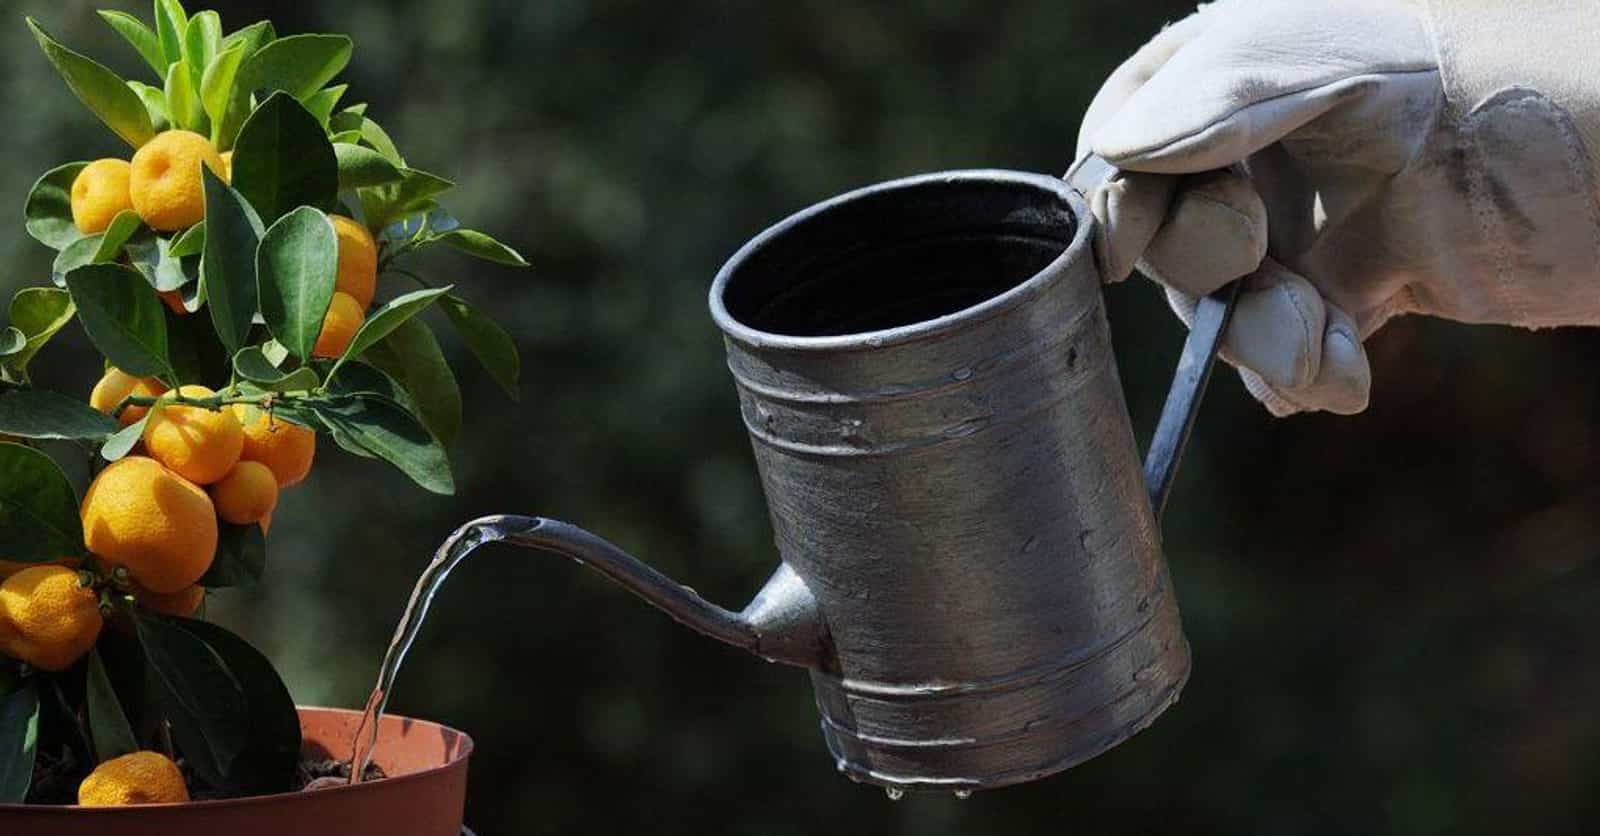 24 Tools And Accessories To Keep Your Garden Blooming